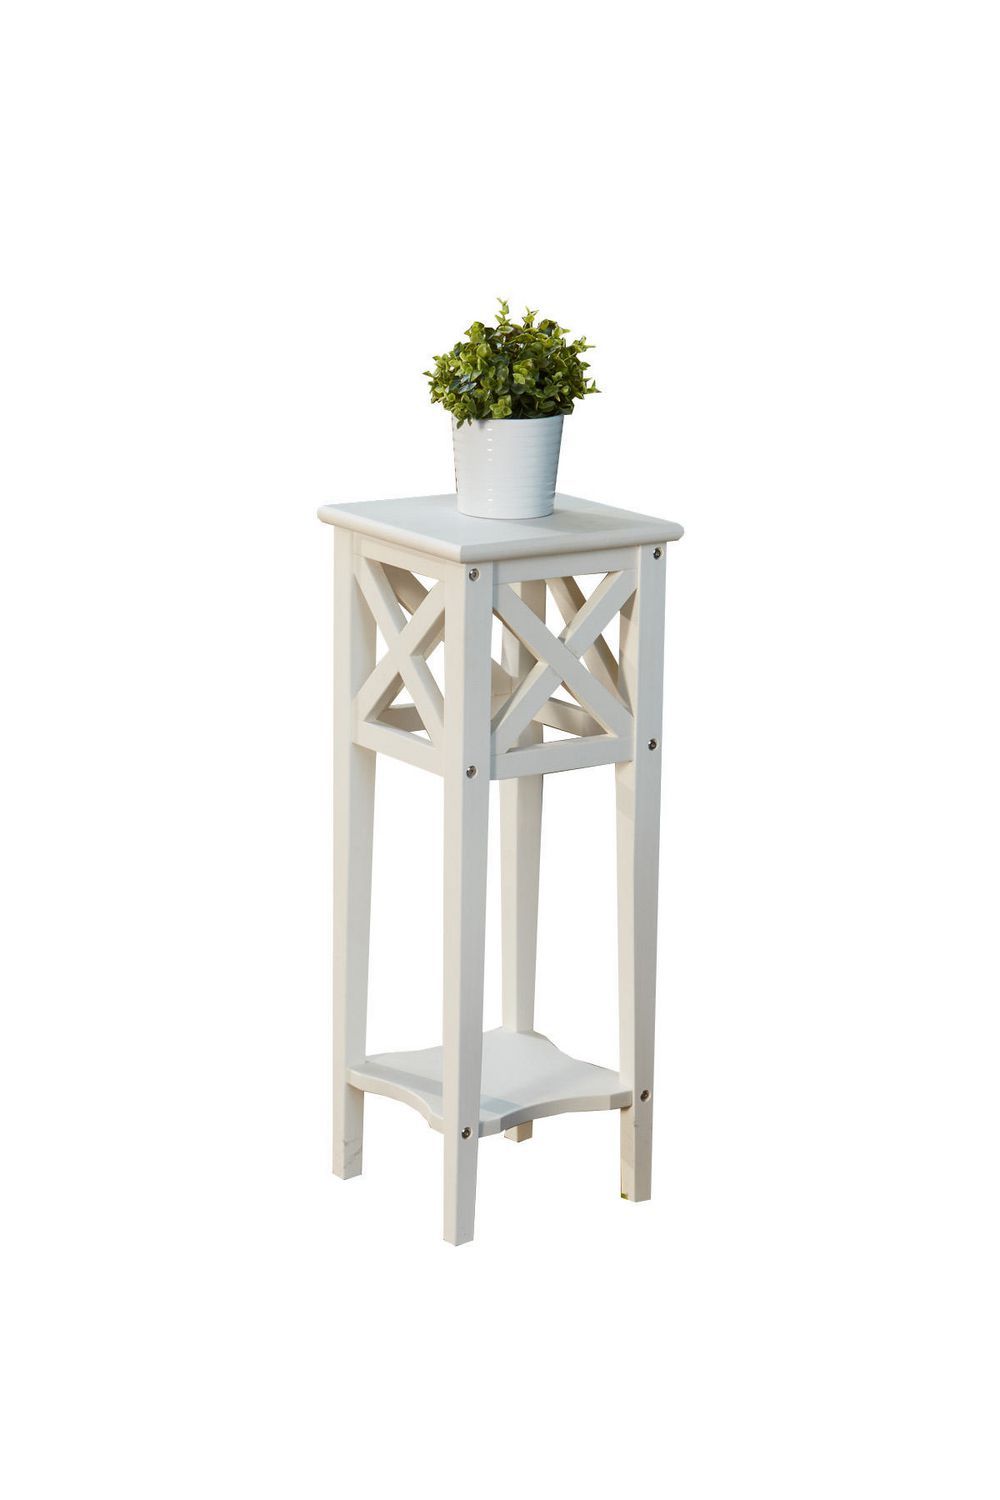 Leisure Design White Ivy Plant Stand | Walmart Canada Inside White Plant Stands (View 10 of 15)